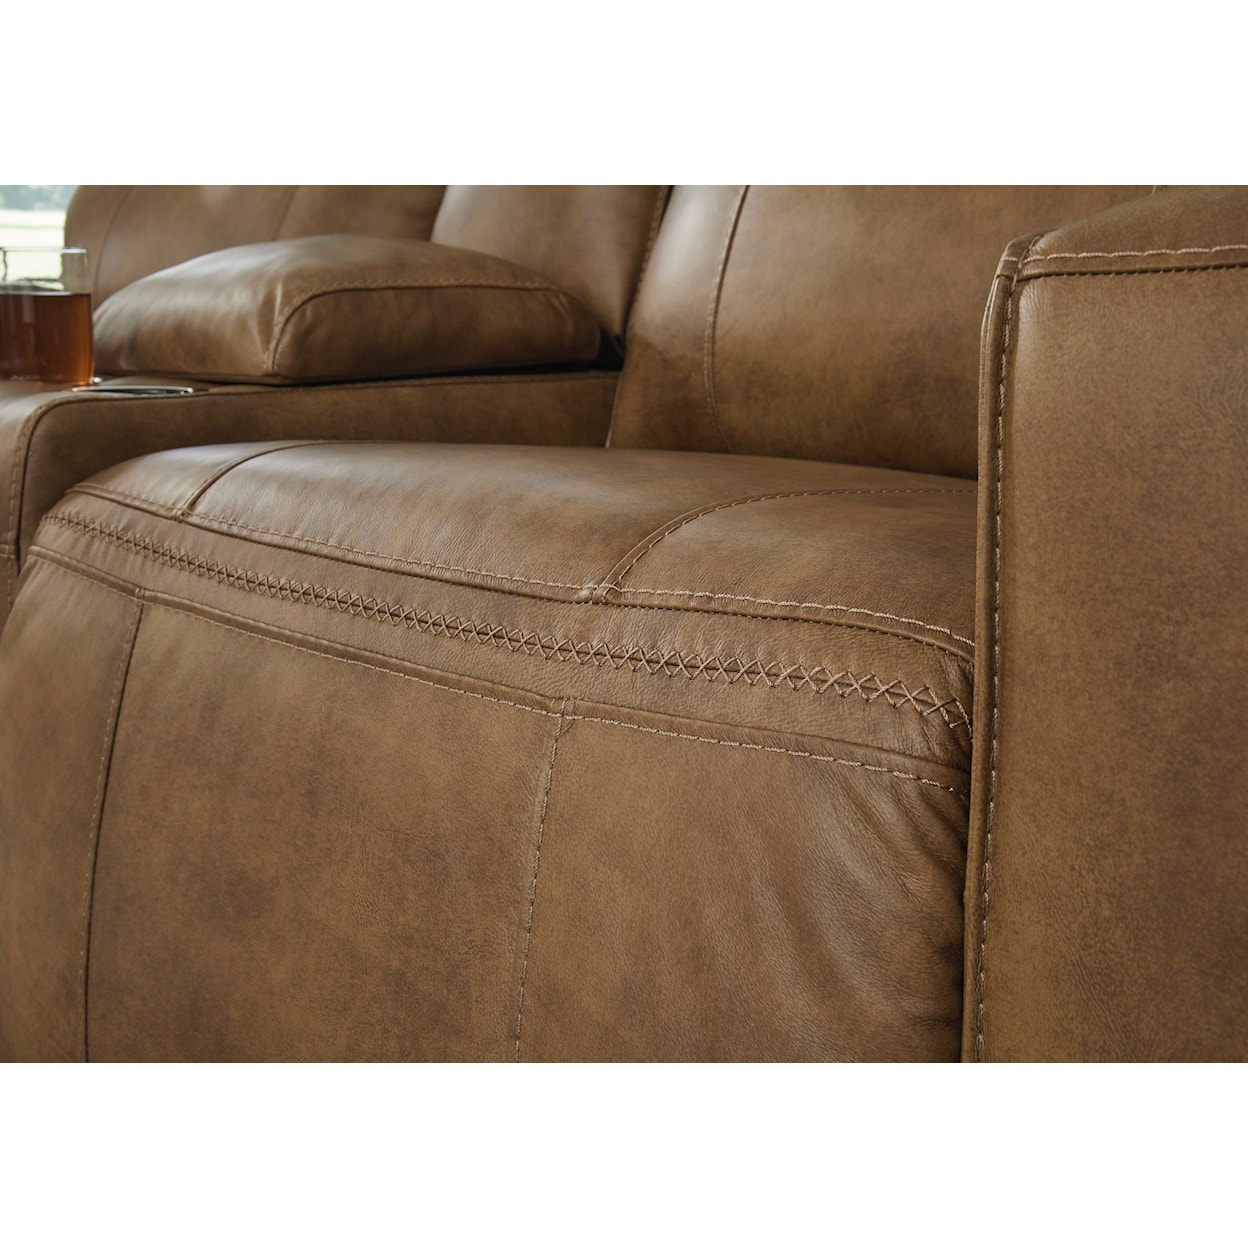 Signature Design by Ashley Furniture Game Plan Power Reclining Loveseat